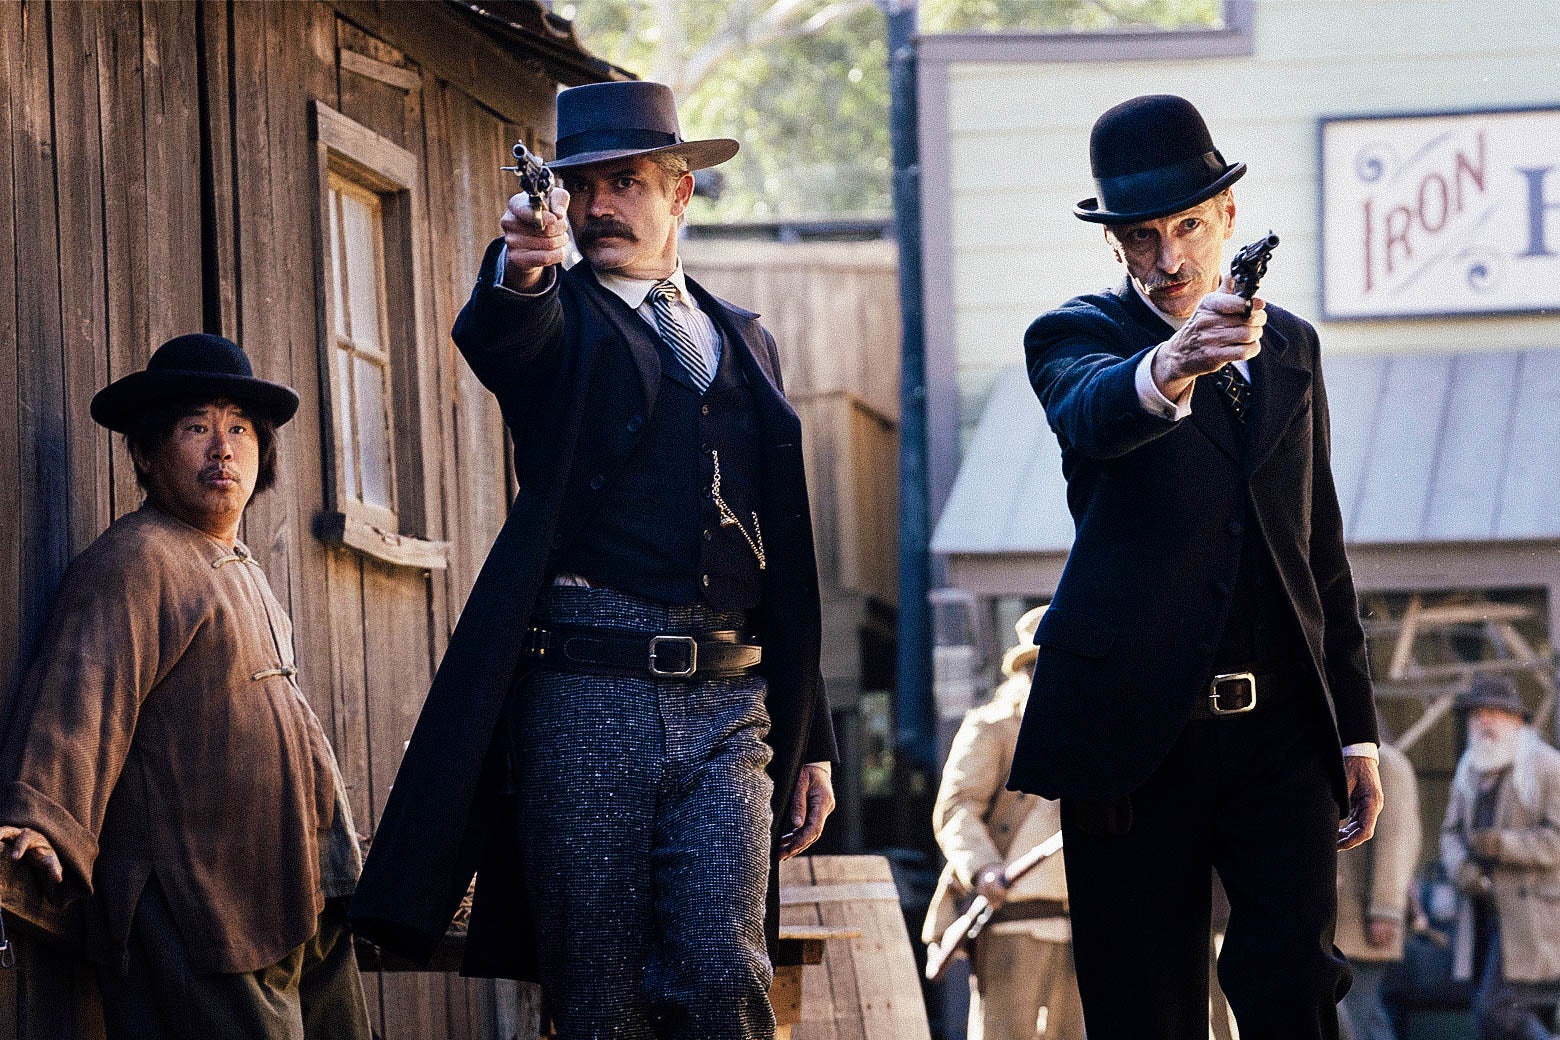 In a scene from Deadwood: The Movie, Timothy Olyphant and John Hawkes as Seth Bullock and Sol Star, aiming guns as they walk through town.